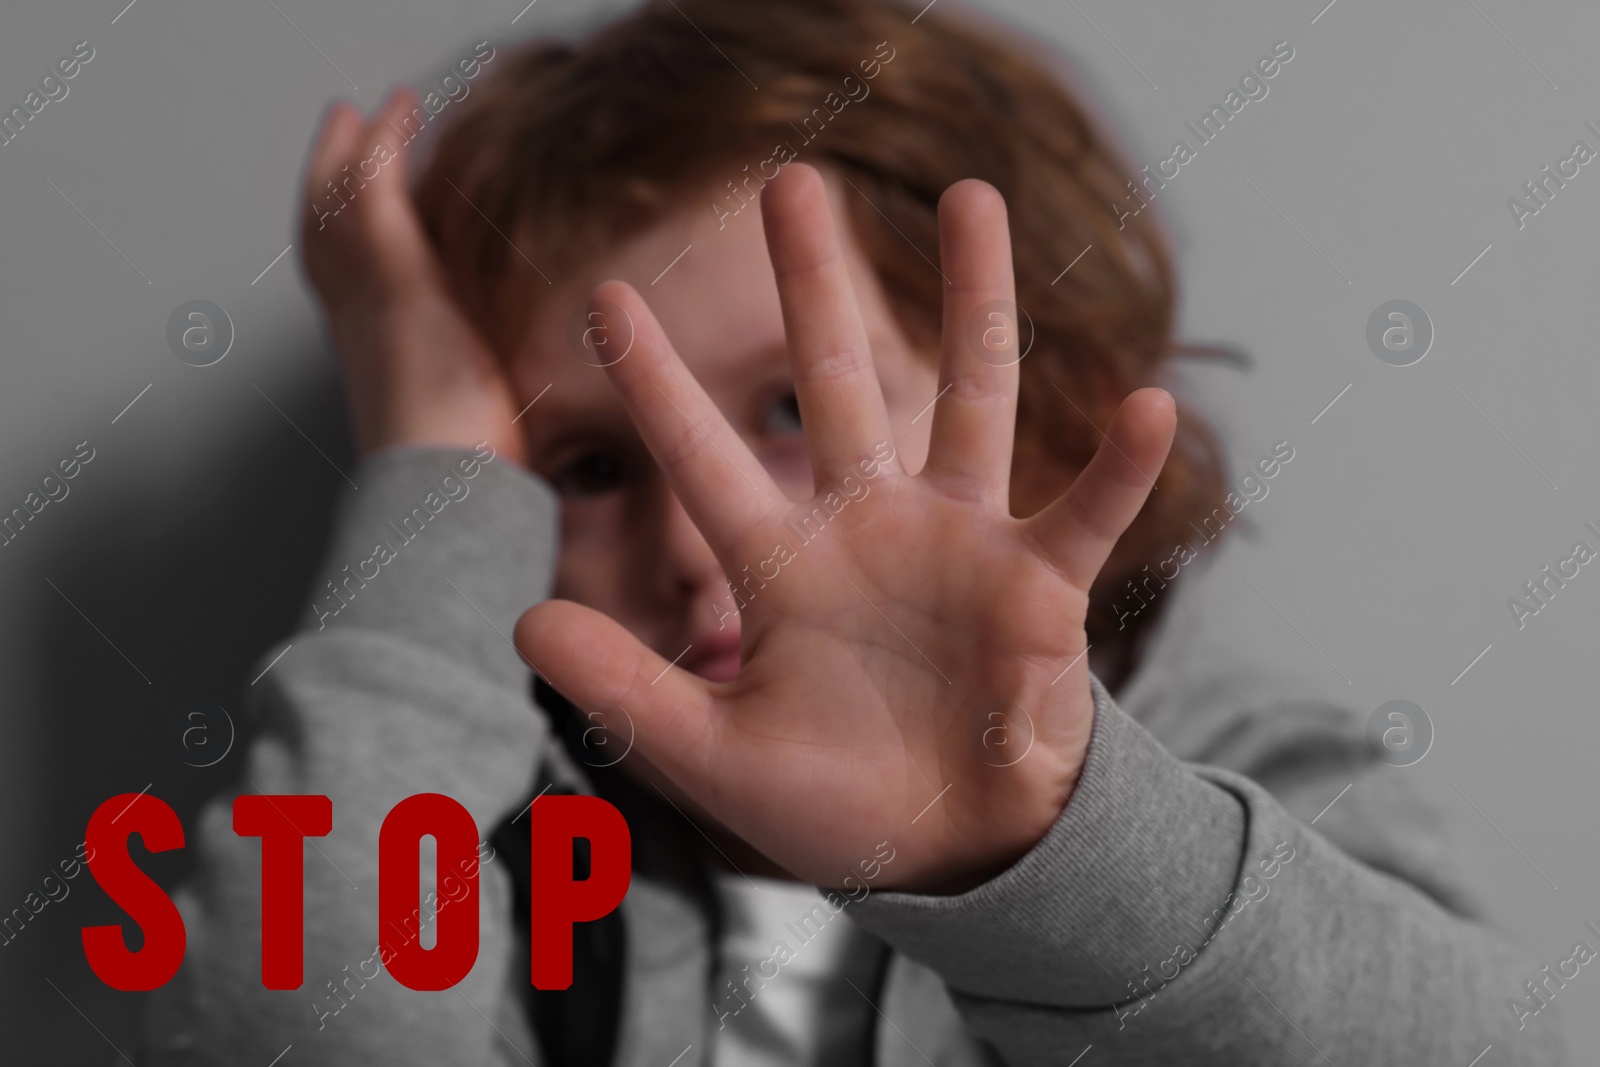 Image of No child abuse. Boy making stop gesture near grey wall, selective focus